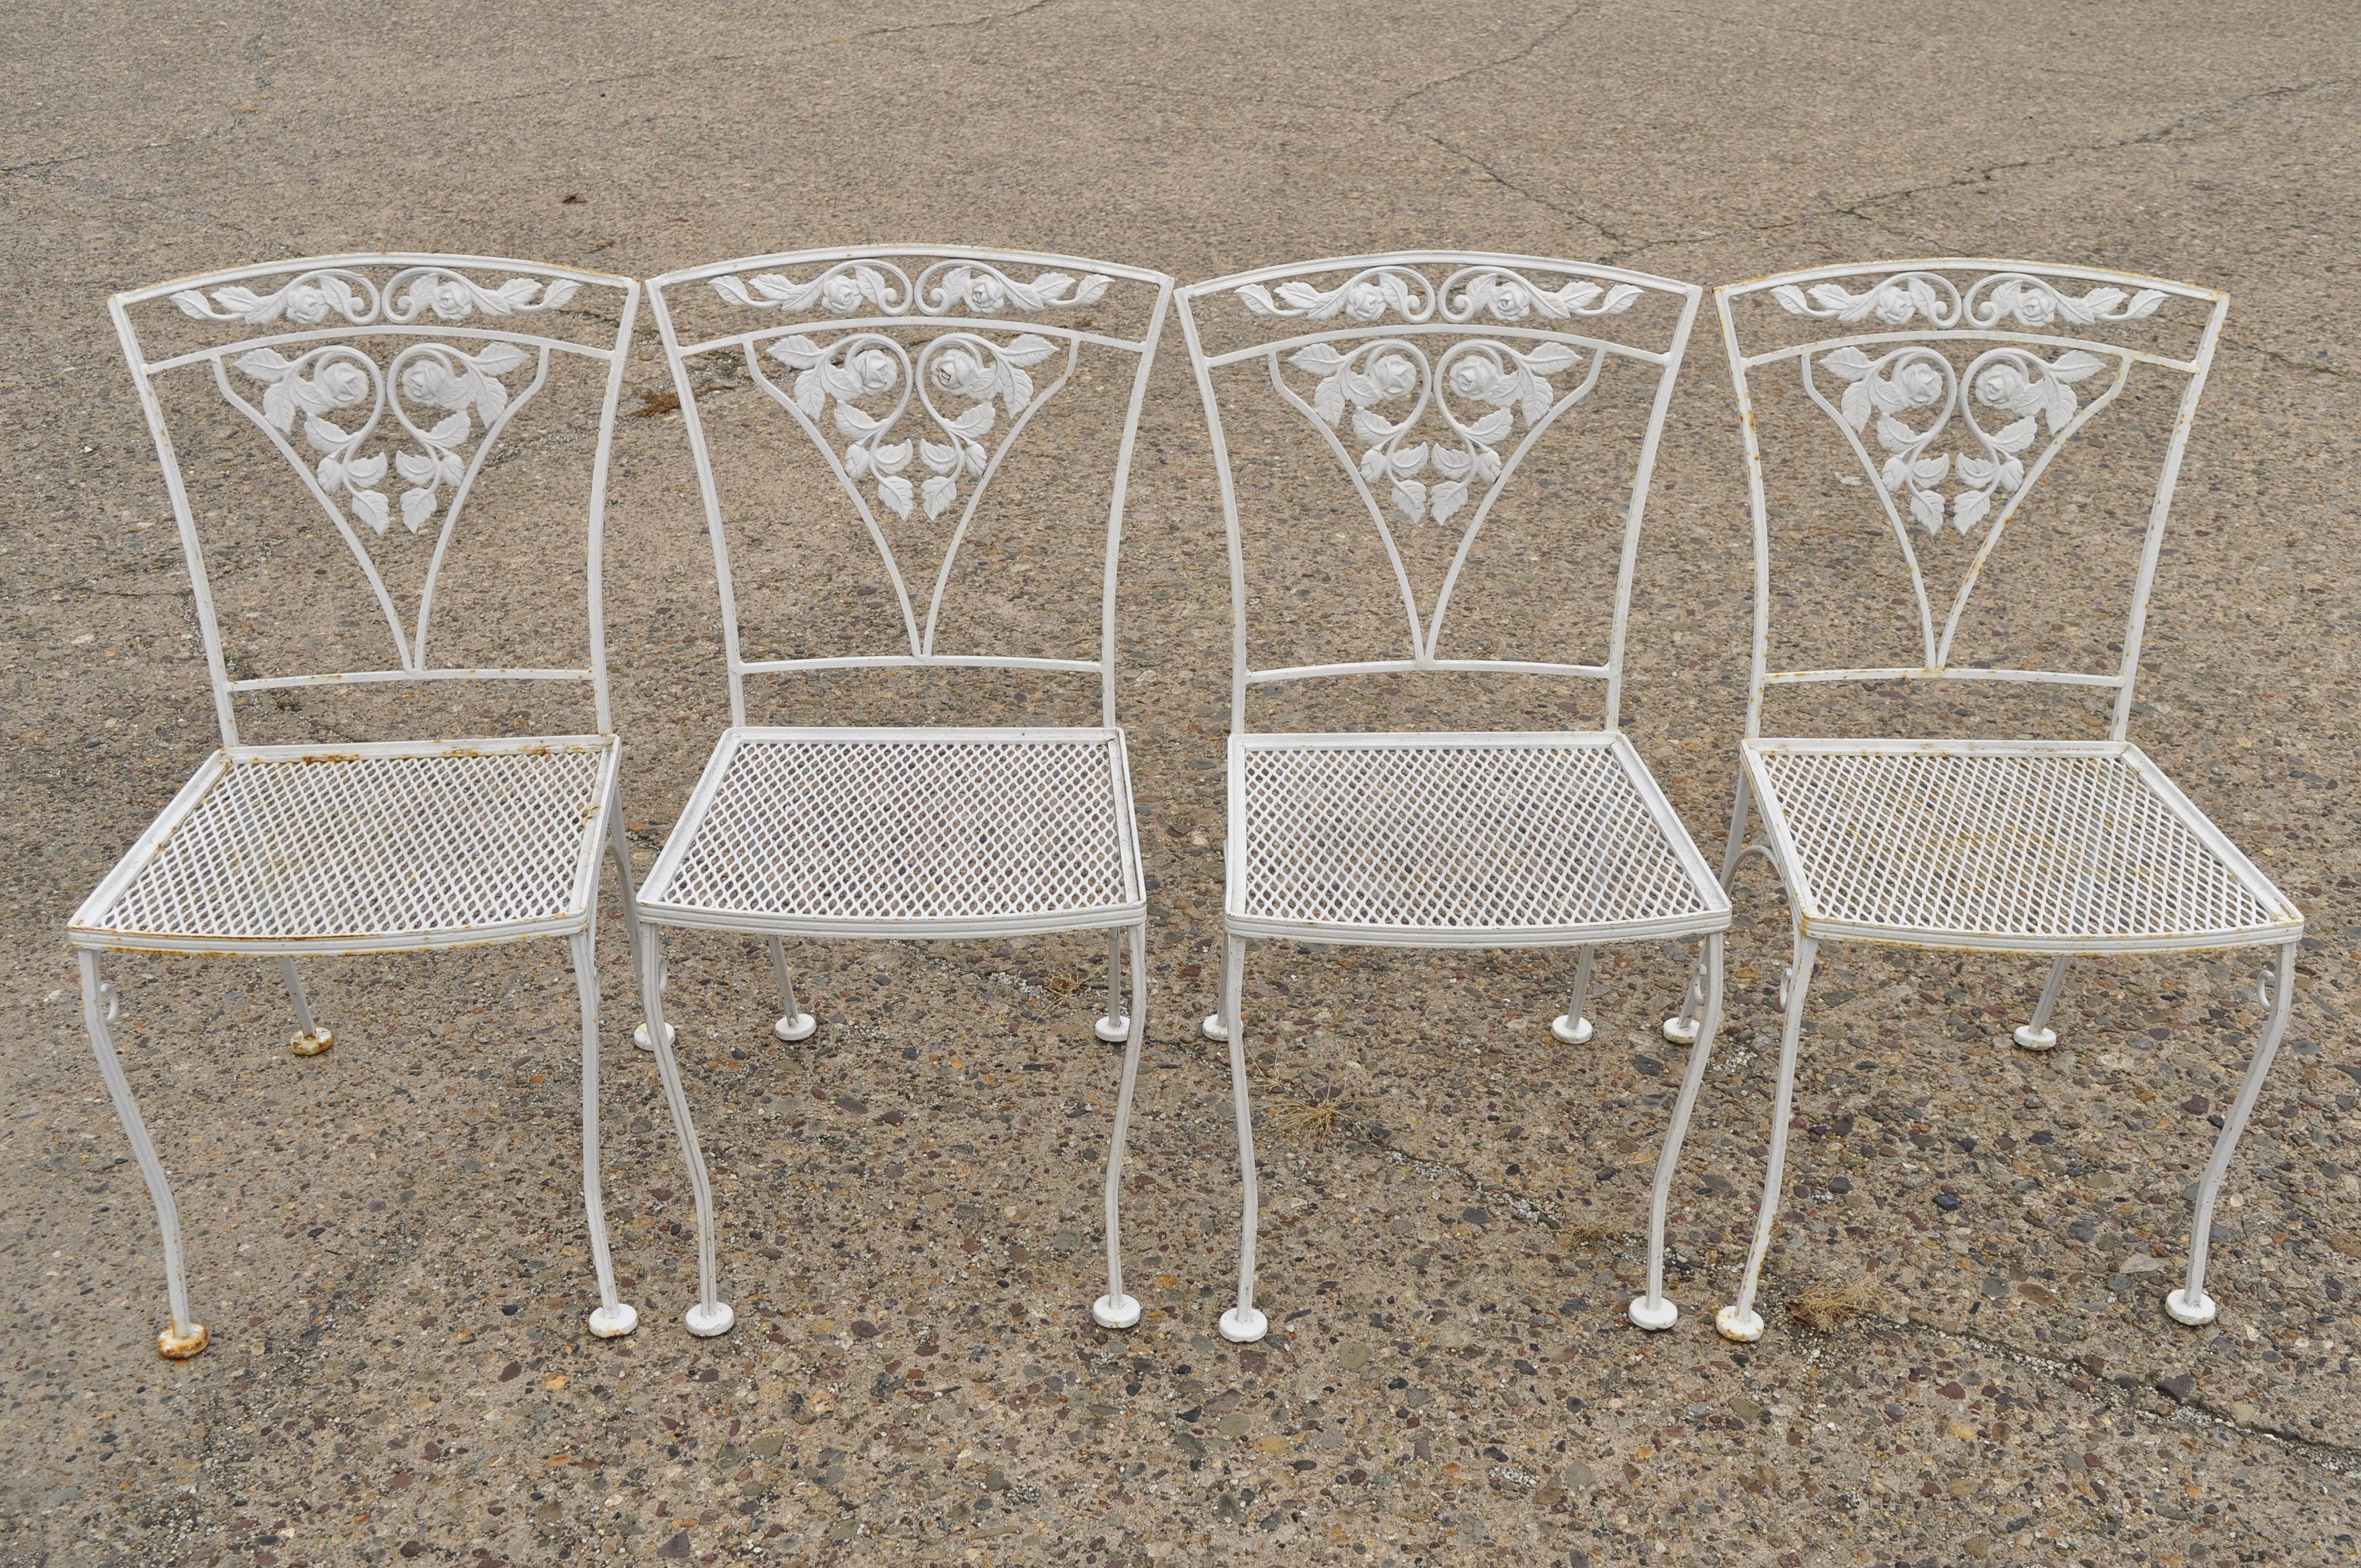 Four Vintage Woodard Chantilly Rose Wrought Iron Patio Garden Dining Chairs. Items feature removable cushions, metal mesh perforated seats, (4) side chairs, wrought iron construction, very nice vintage item, great style & form. Mid 20th.